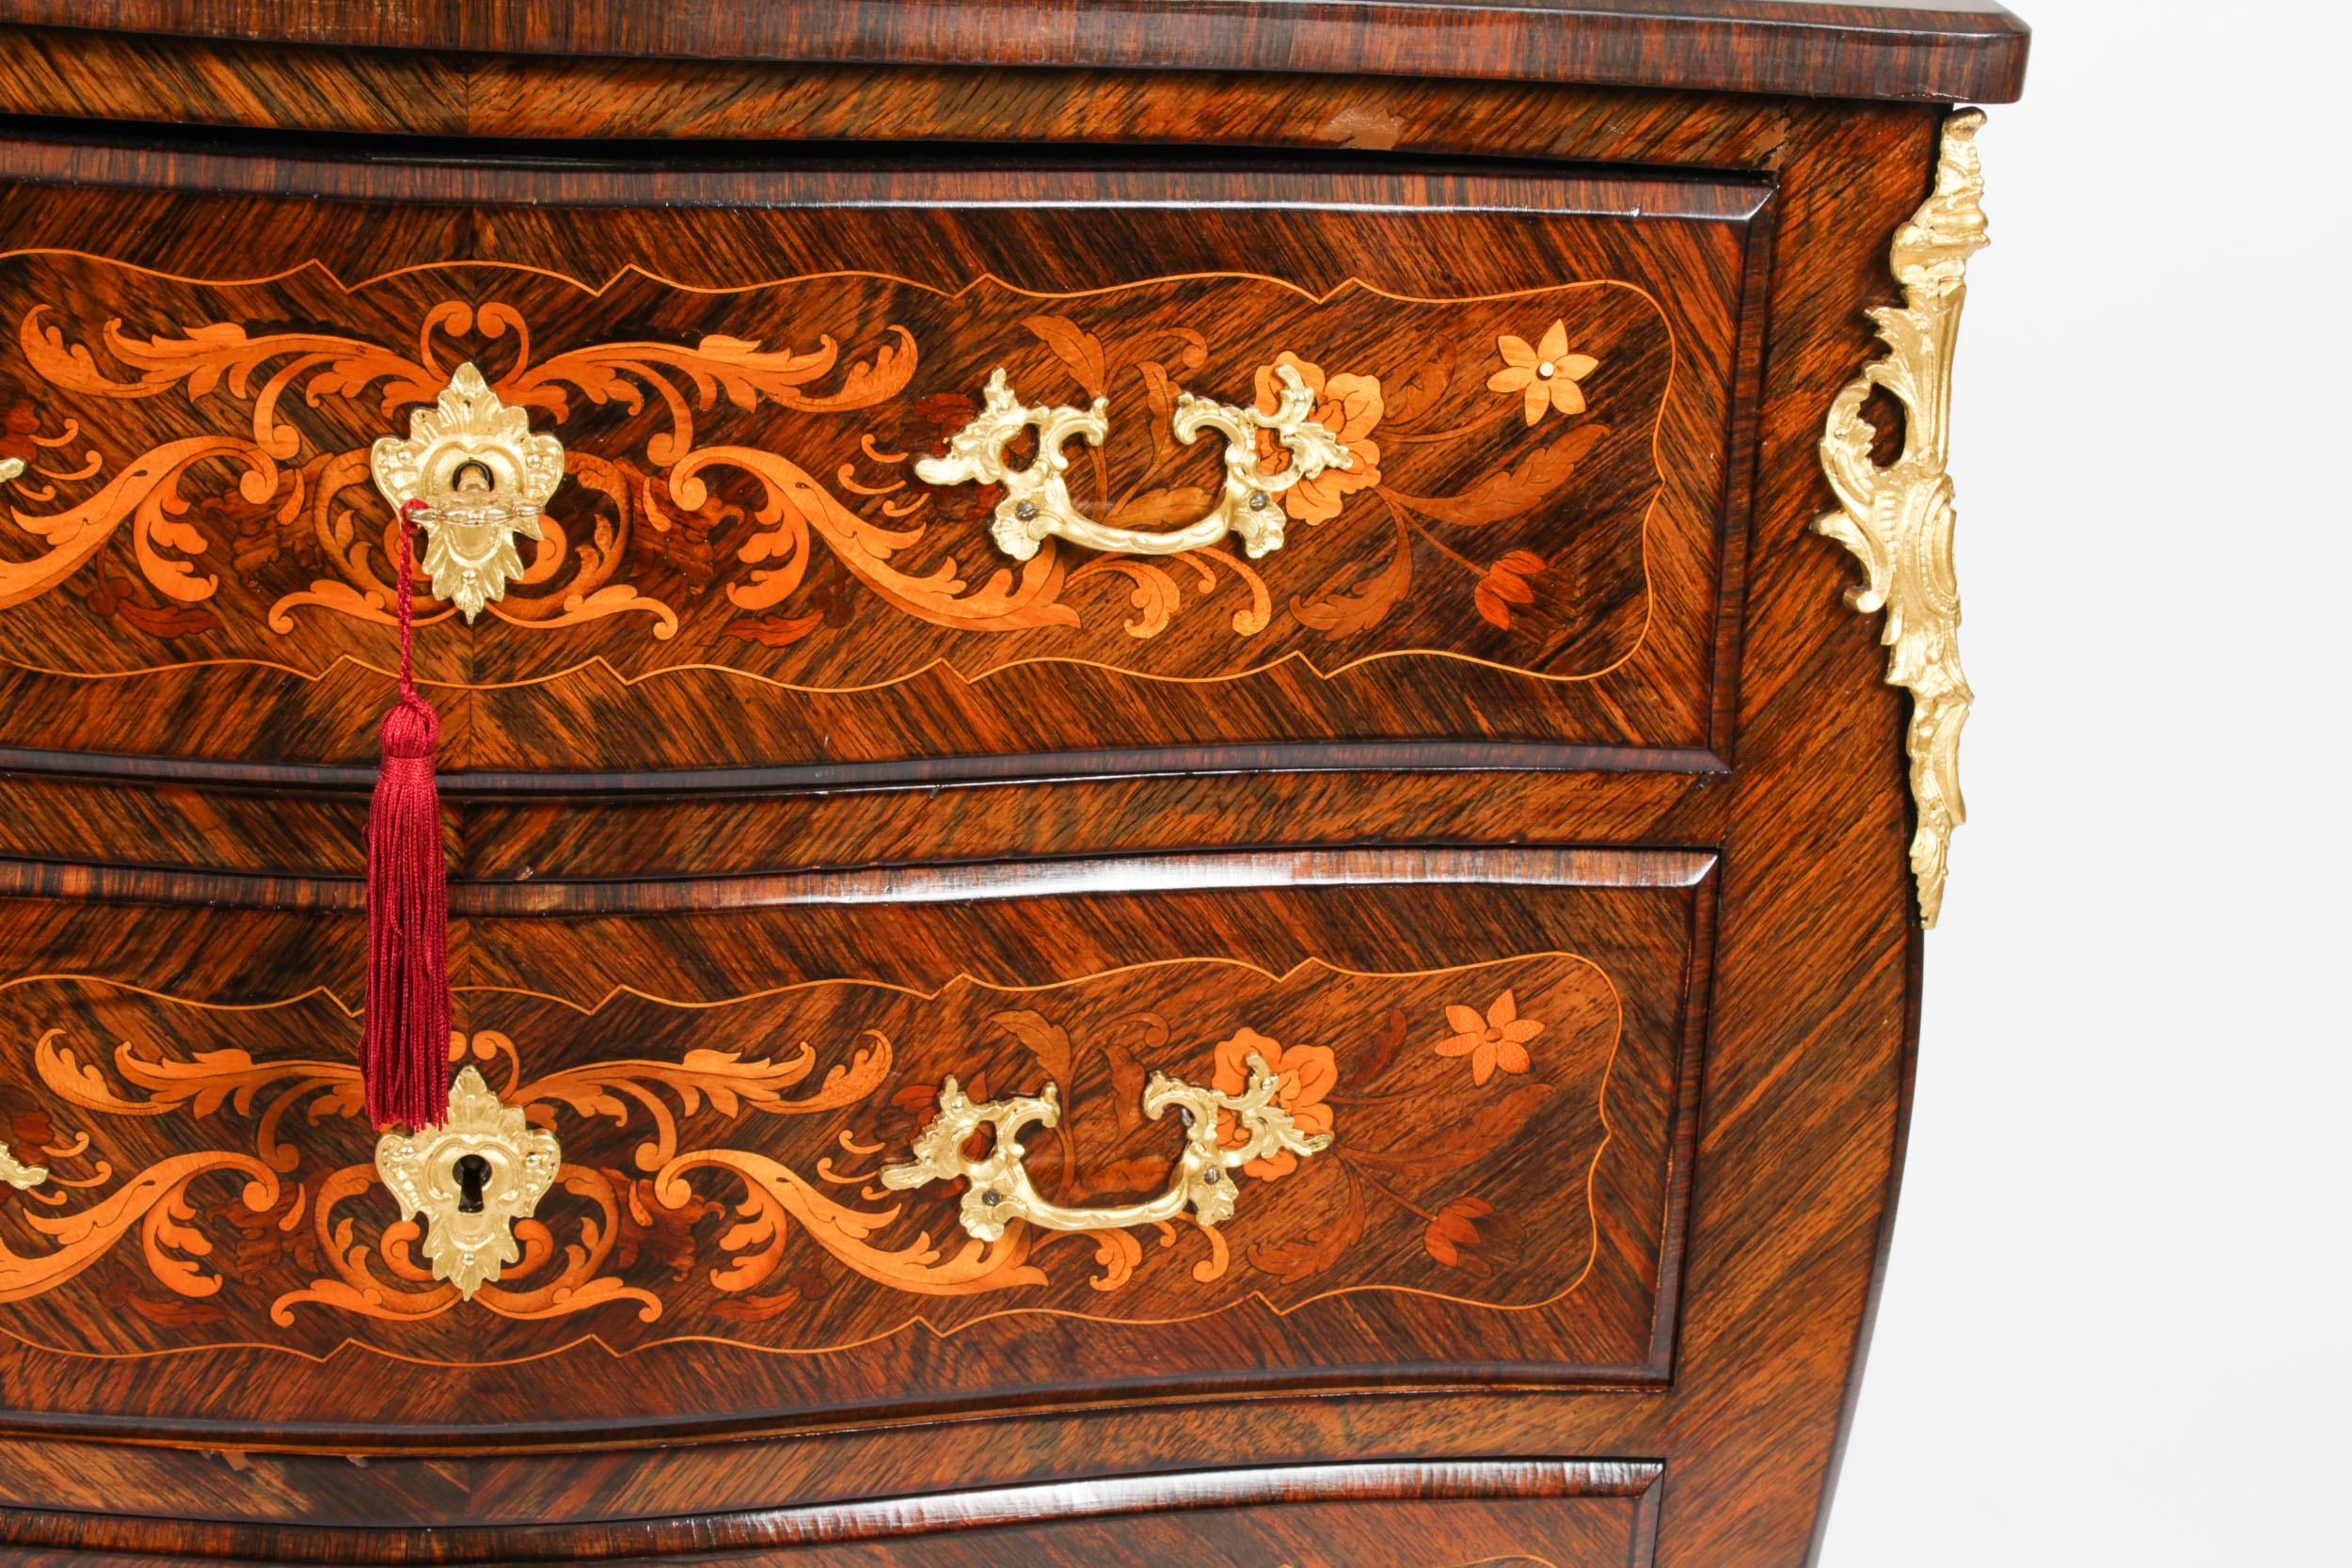 Ormolu Antique French Louis Revival Marquetry Commode Chest of Drawers 19th Century For Sale